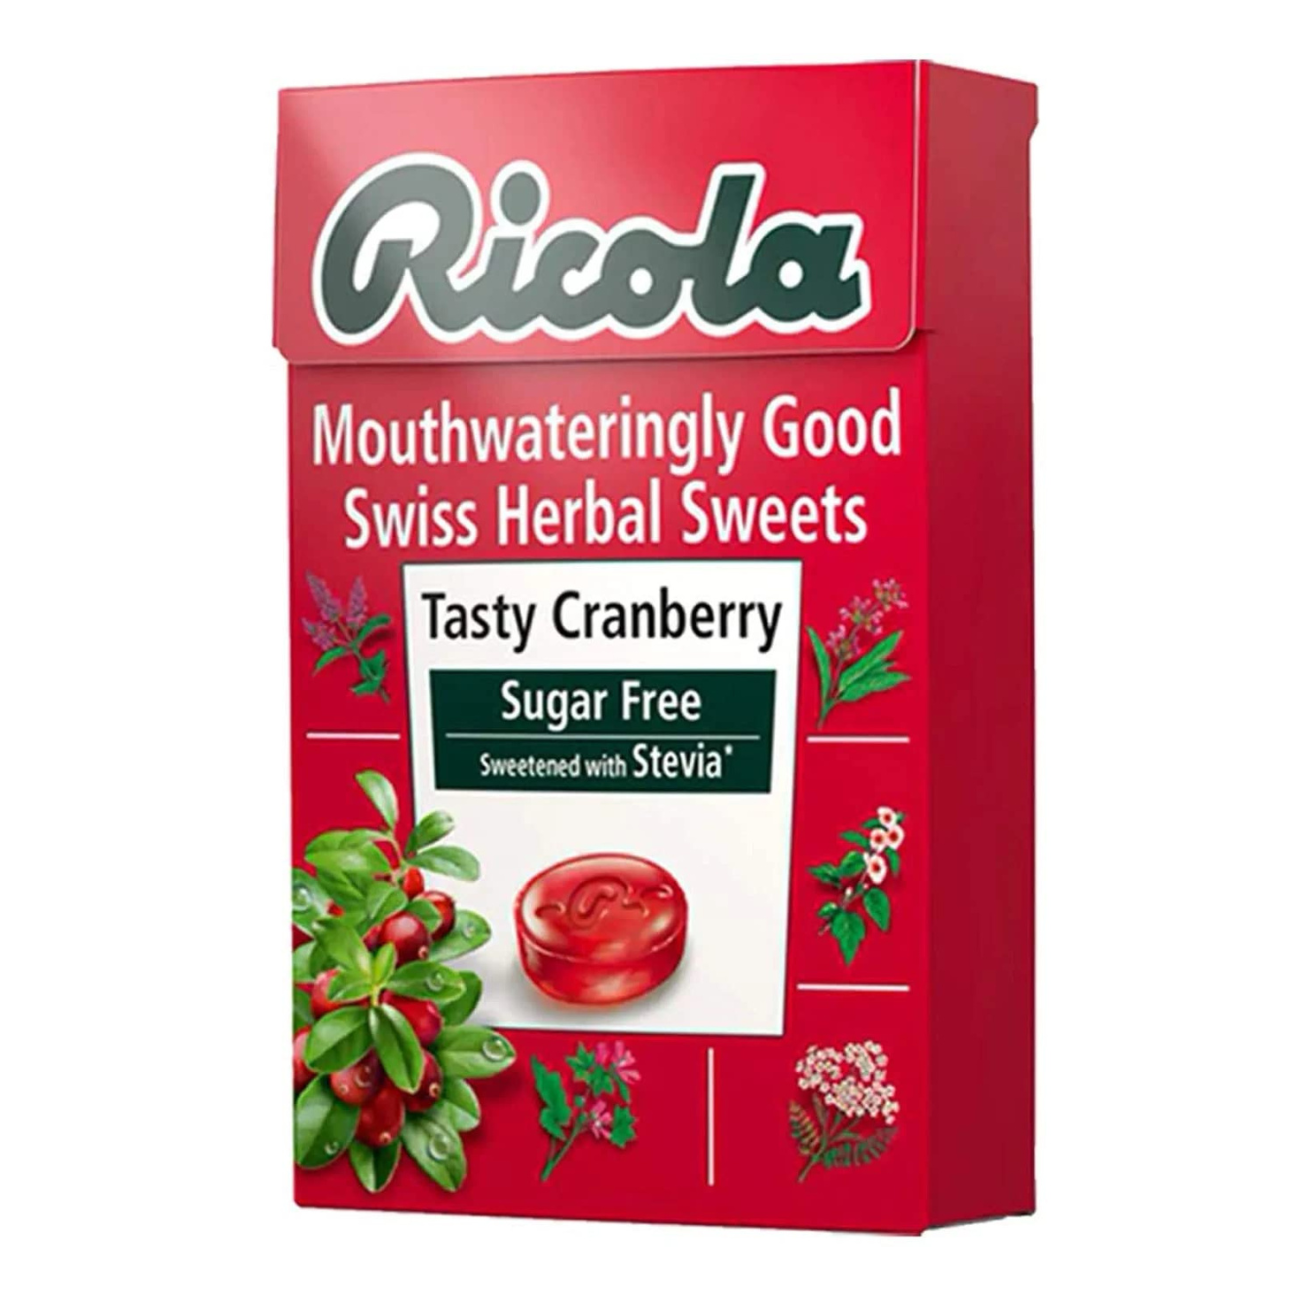 Cranberry Sugar Free with Stevia Swiss Herbal Sweets 45g